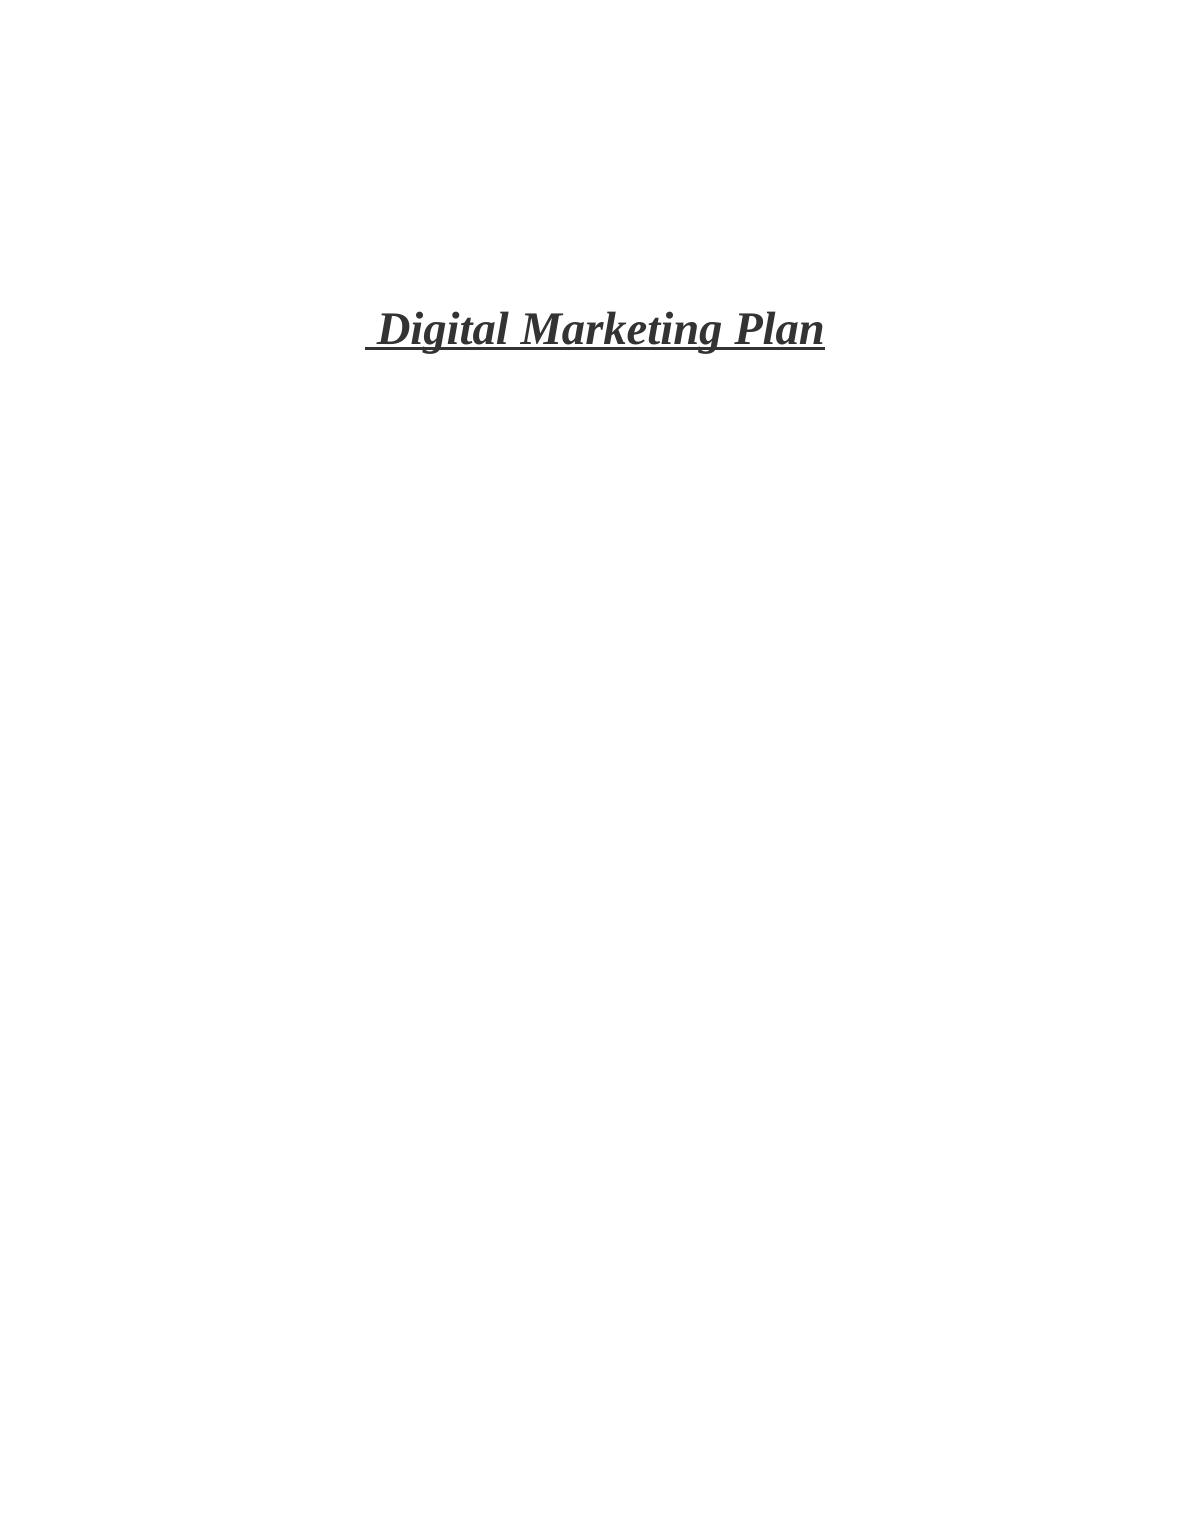 Digital Marketing Plan for L'Oreal - Assignments_1